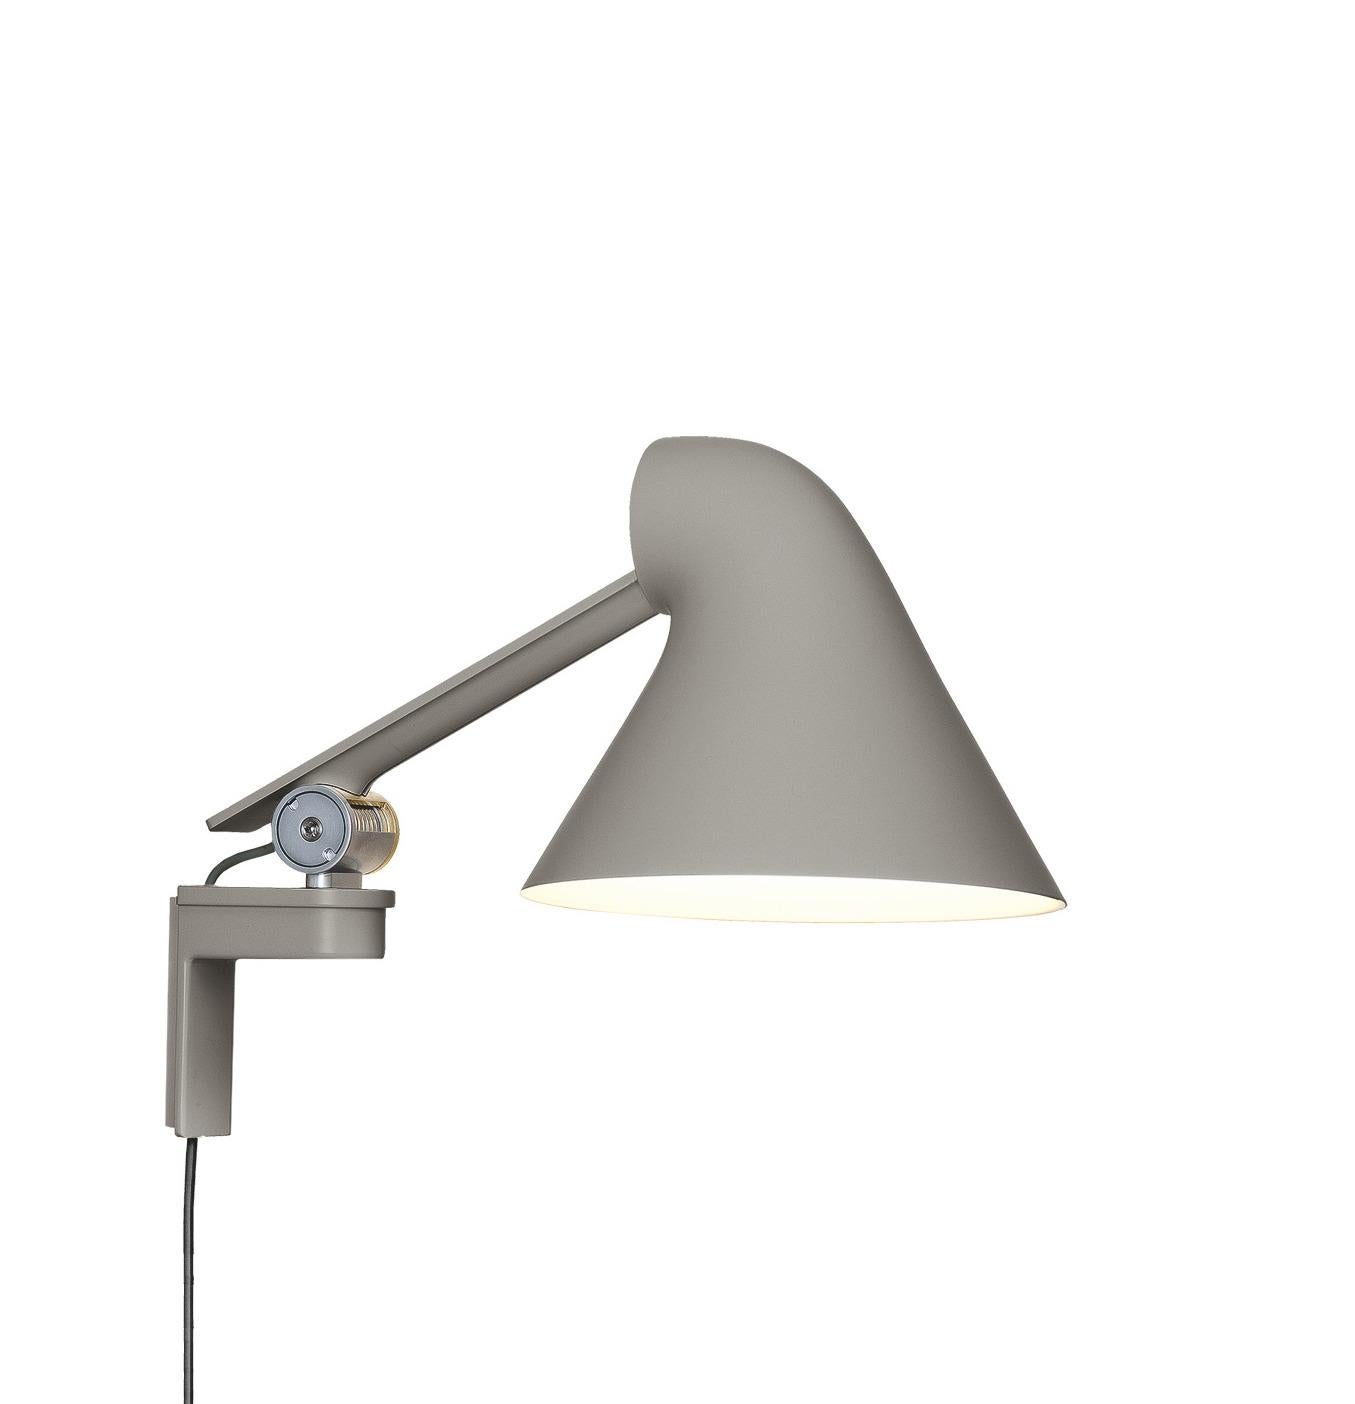 Louis Poulsen NJP Wall Long Lamp by Nendo, Oki Sato In New Condition For Sale In New York, NY